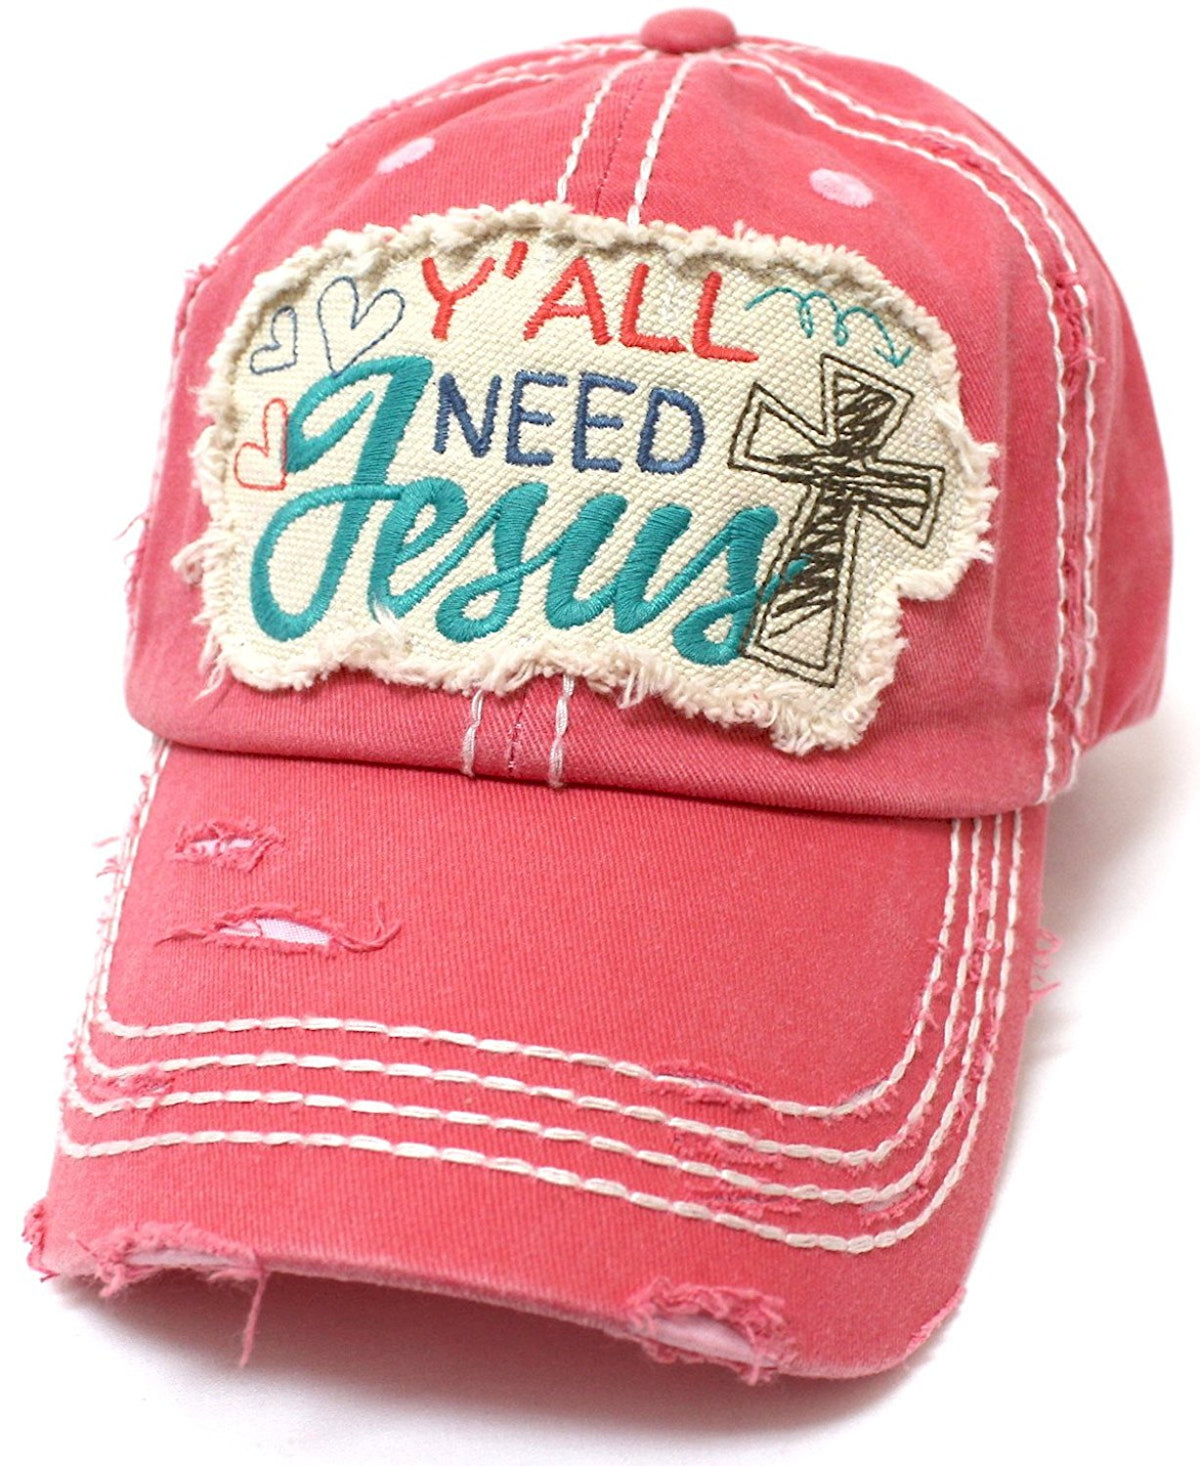 Hearts, Cross, & "Y'all Need Jesus" Patch Embroidery Hat - Caps 'N Vintage 